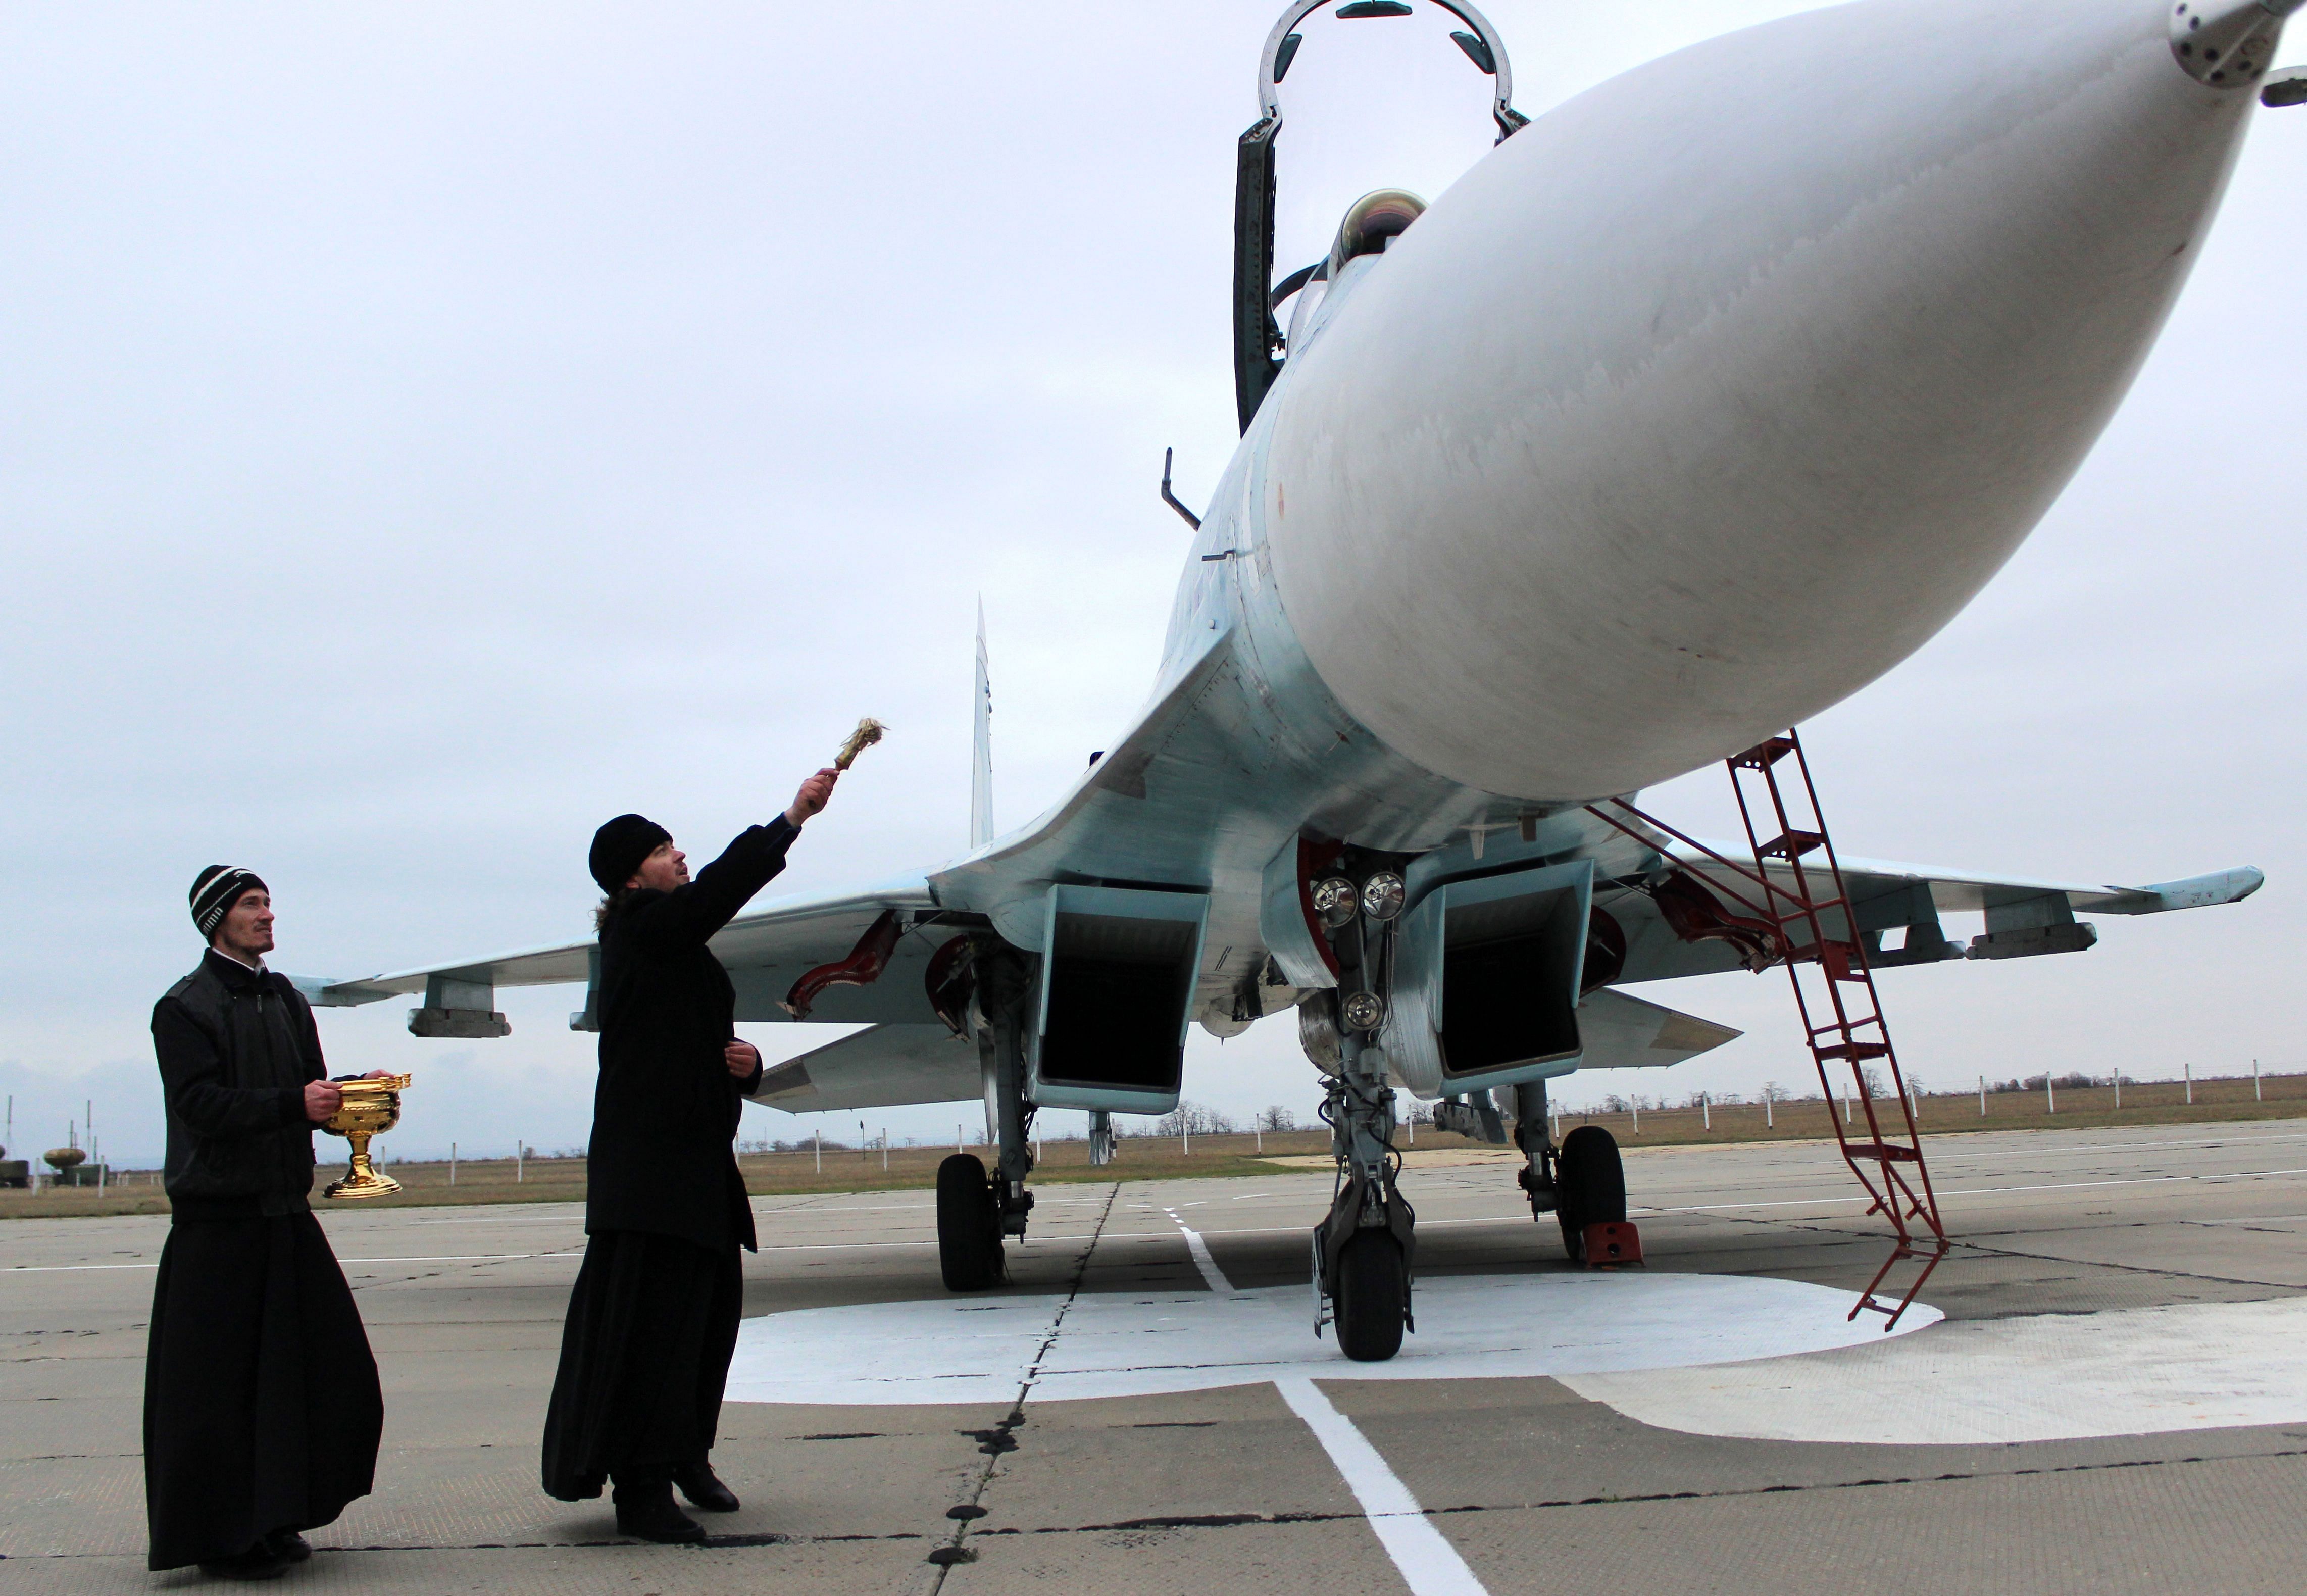 A Russian orthodox priest blesses a SU-27 SM fighter jet on the airfield of Belbek military airport outside Sevastopol, Crimea. (Credit: AFP Photo)